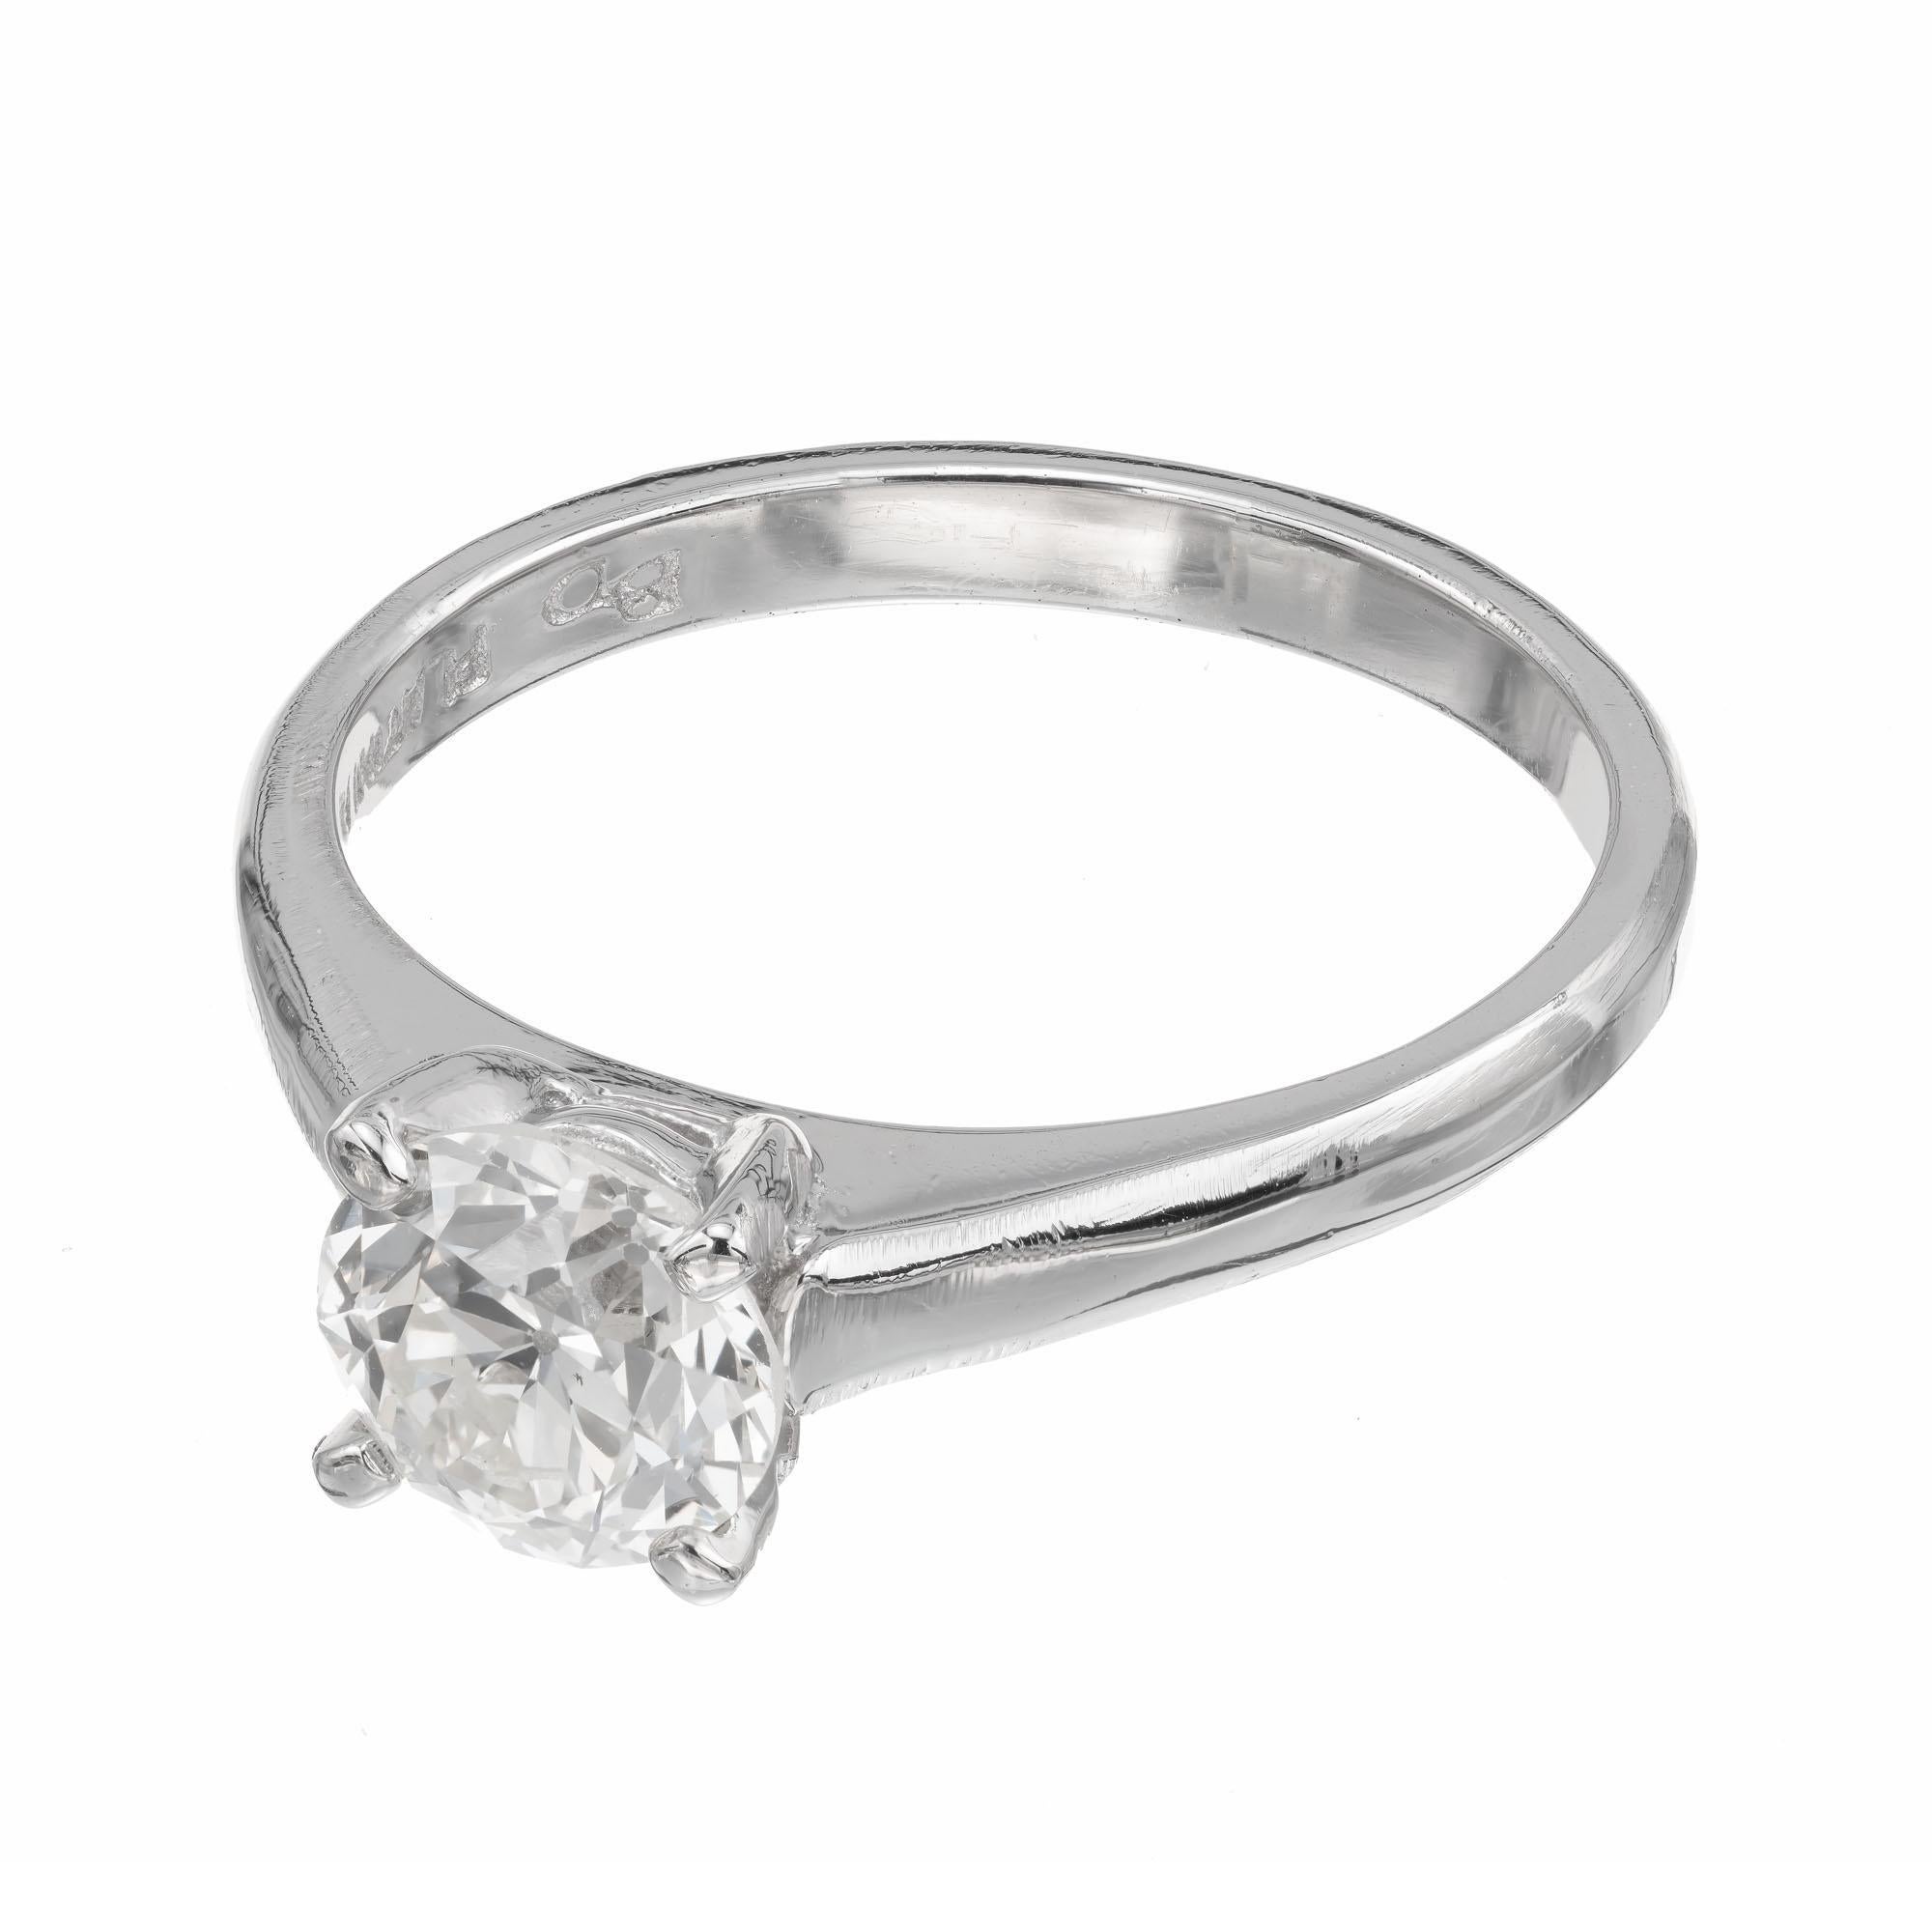 Old European cut diamond engagement ring. circa 1920's. GIA certified 0.99ct center stone. In a platinum solitaire setting designed to fit flush with most wedding bands.

1 Old European cut K VS2 diamond, Approximate .99ct GIA Certificate #